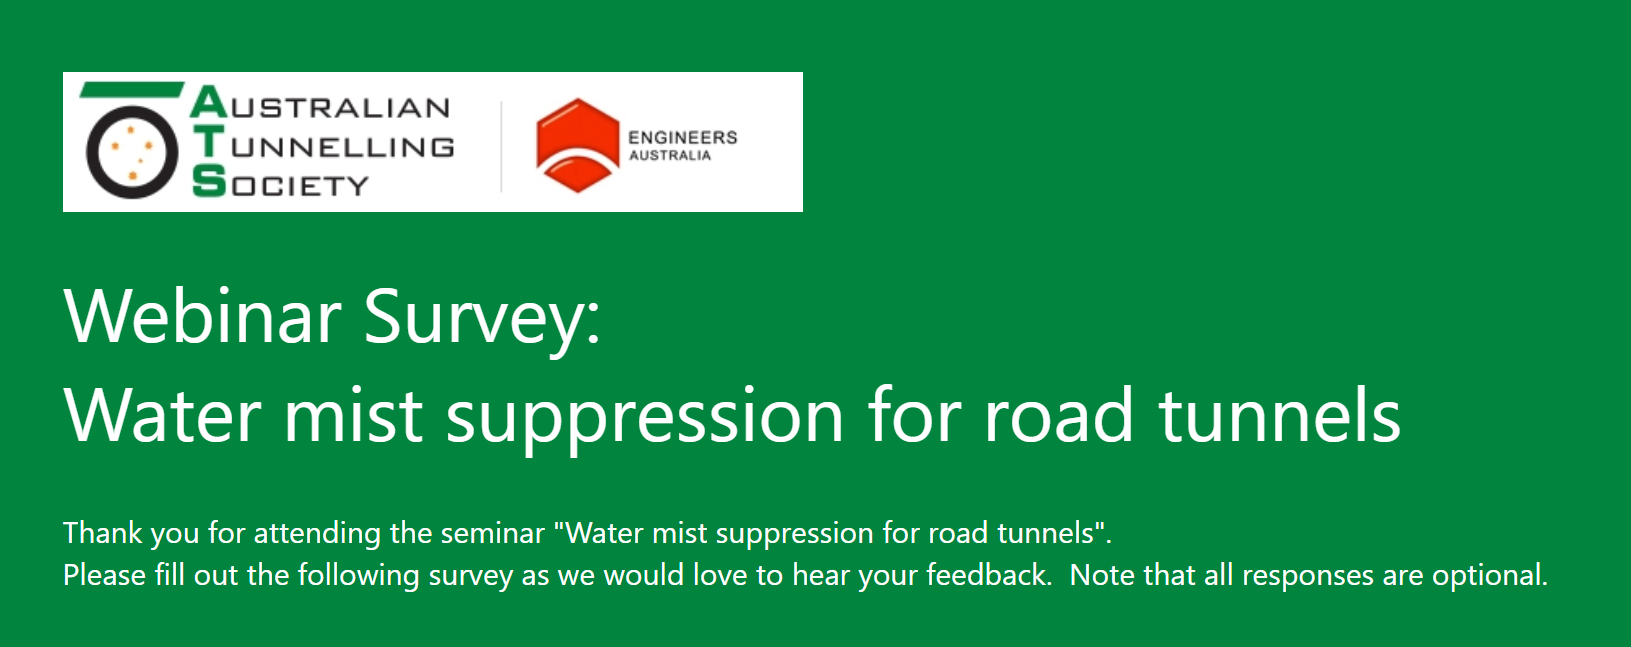 ATS Webinar Survey: Water mist suppression for road tunnels